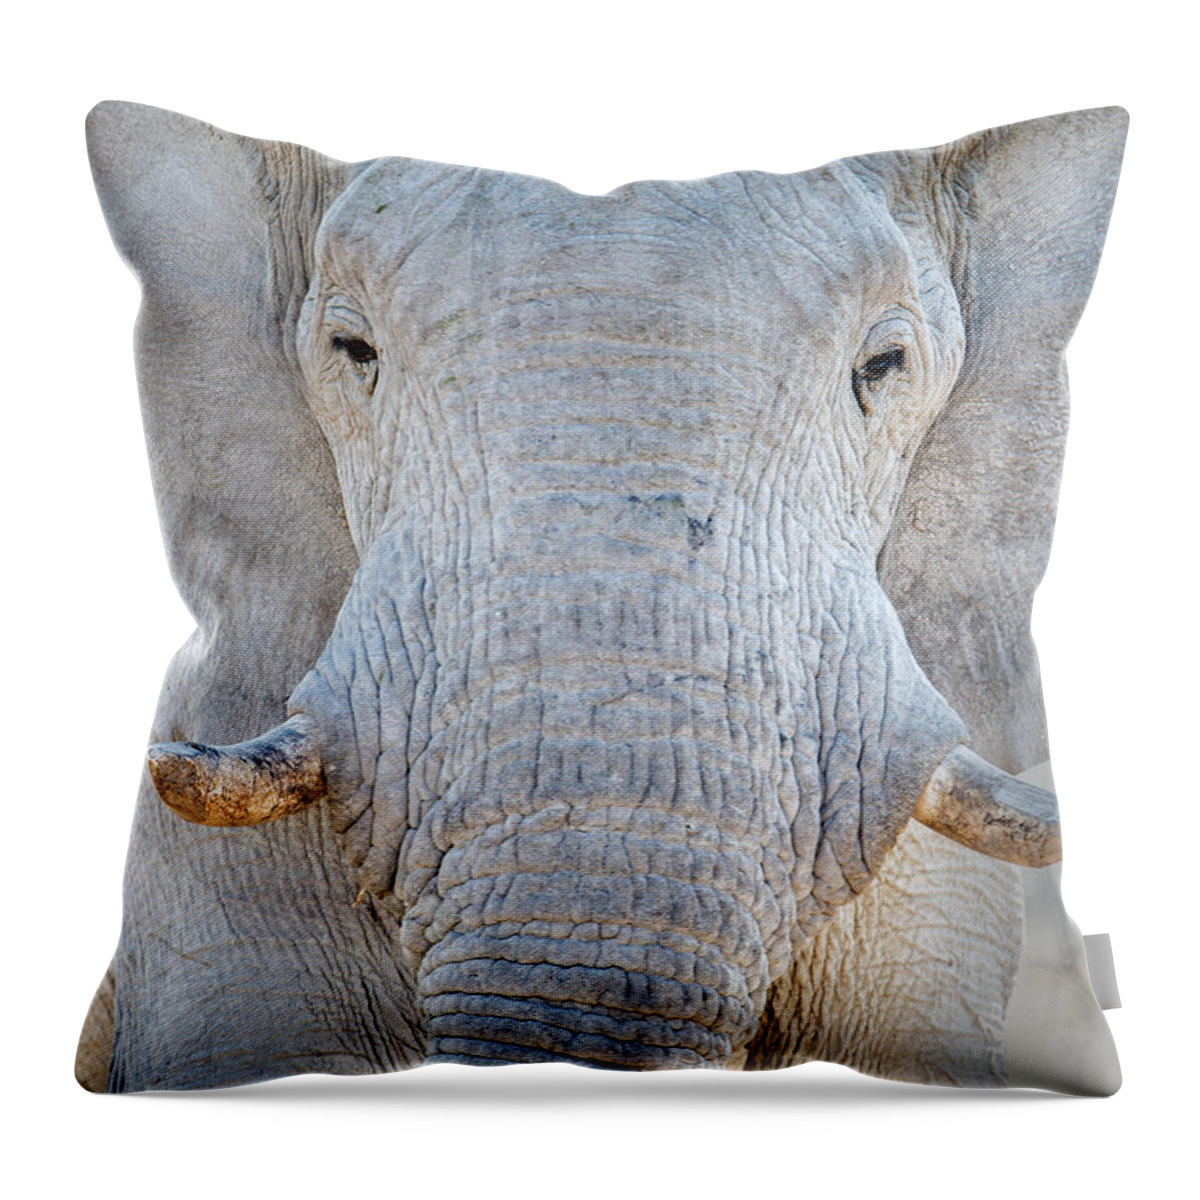 Photography Throw Pillow featuring the photograph African Elephant Loxodonta Africana #13 by Panoramic Images